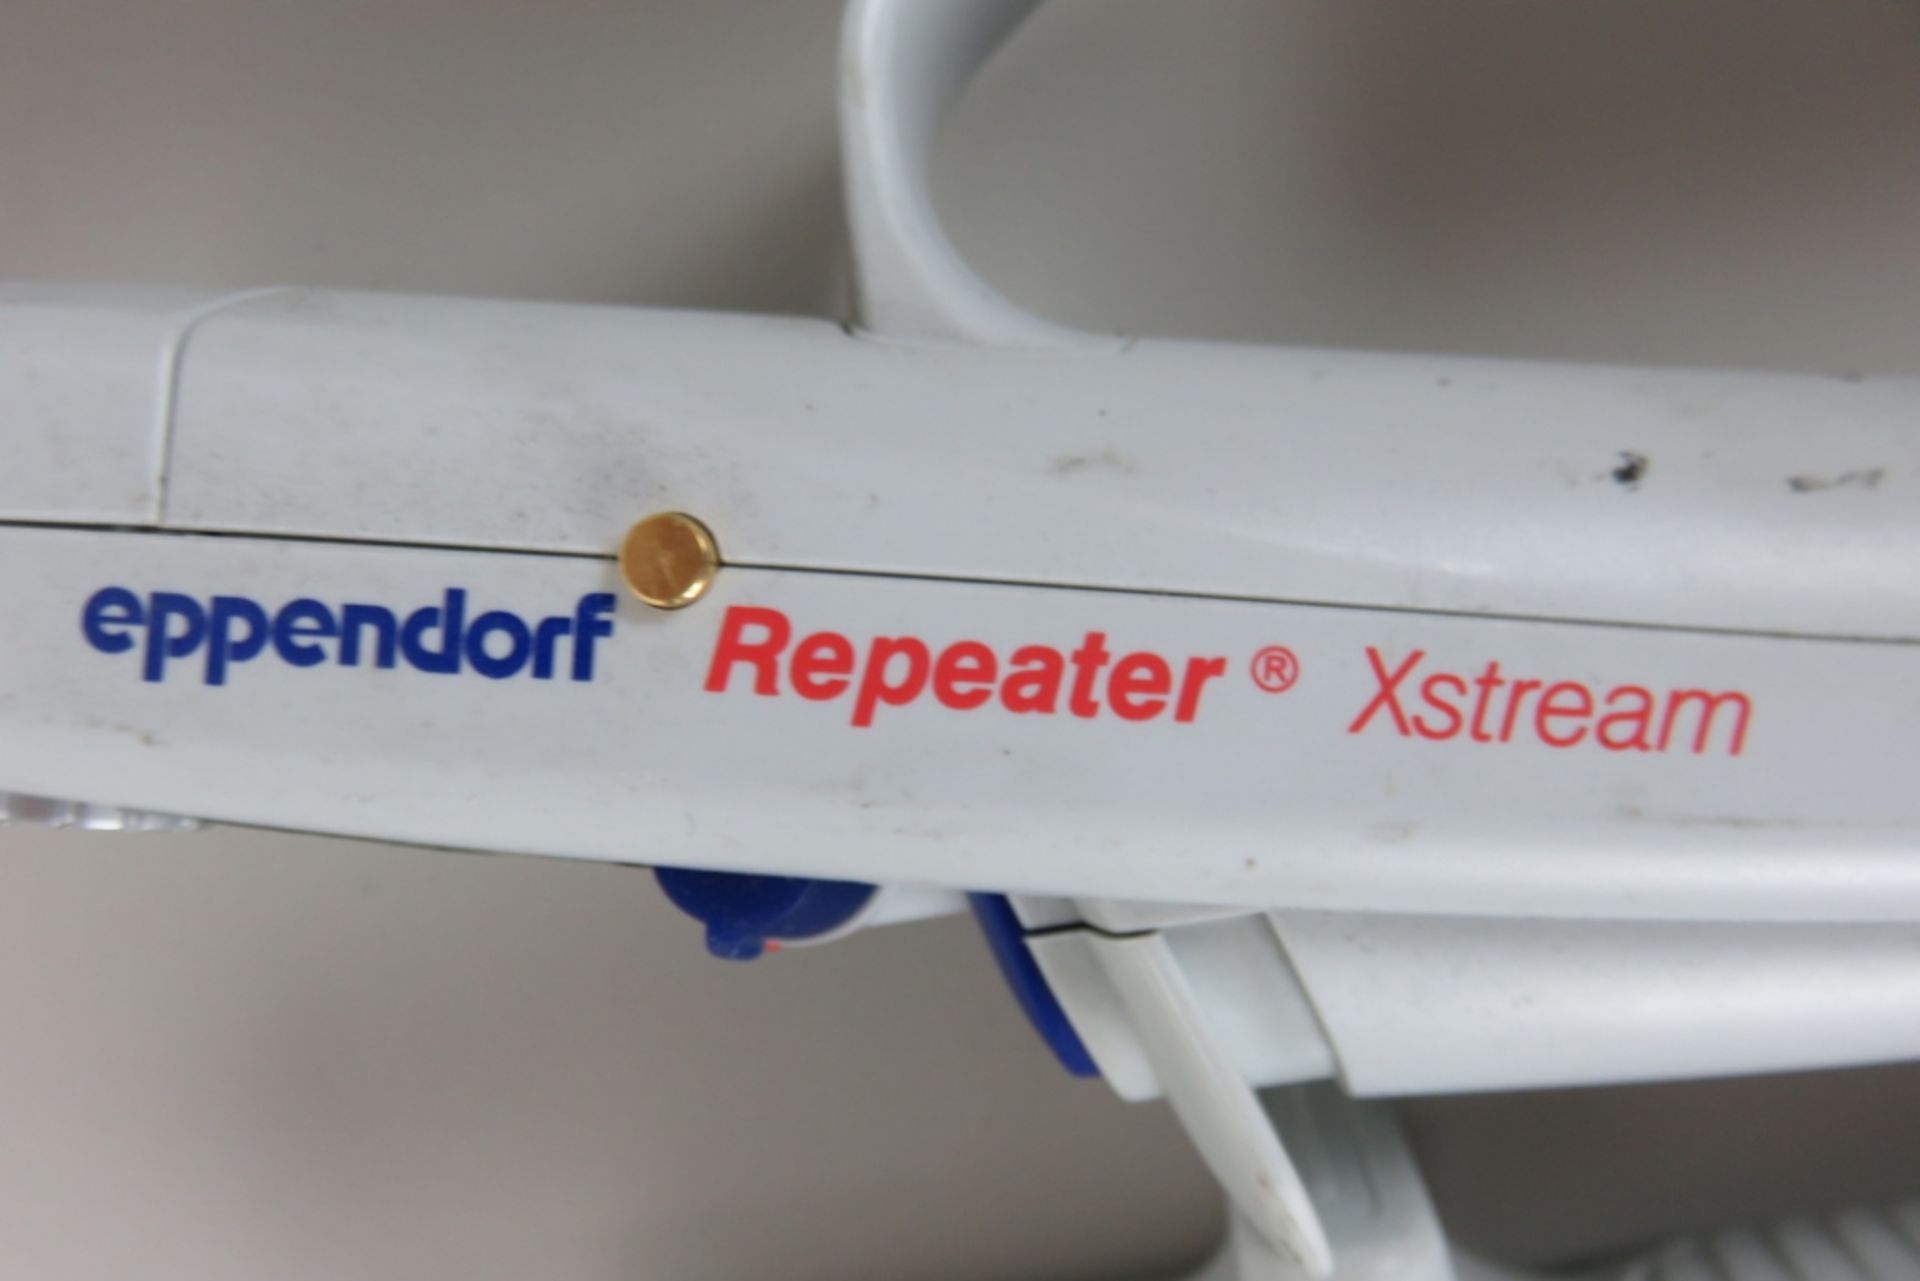 Lot of Eppendorf Pipette - Image 4 of 6